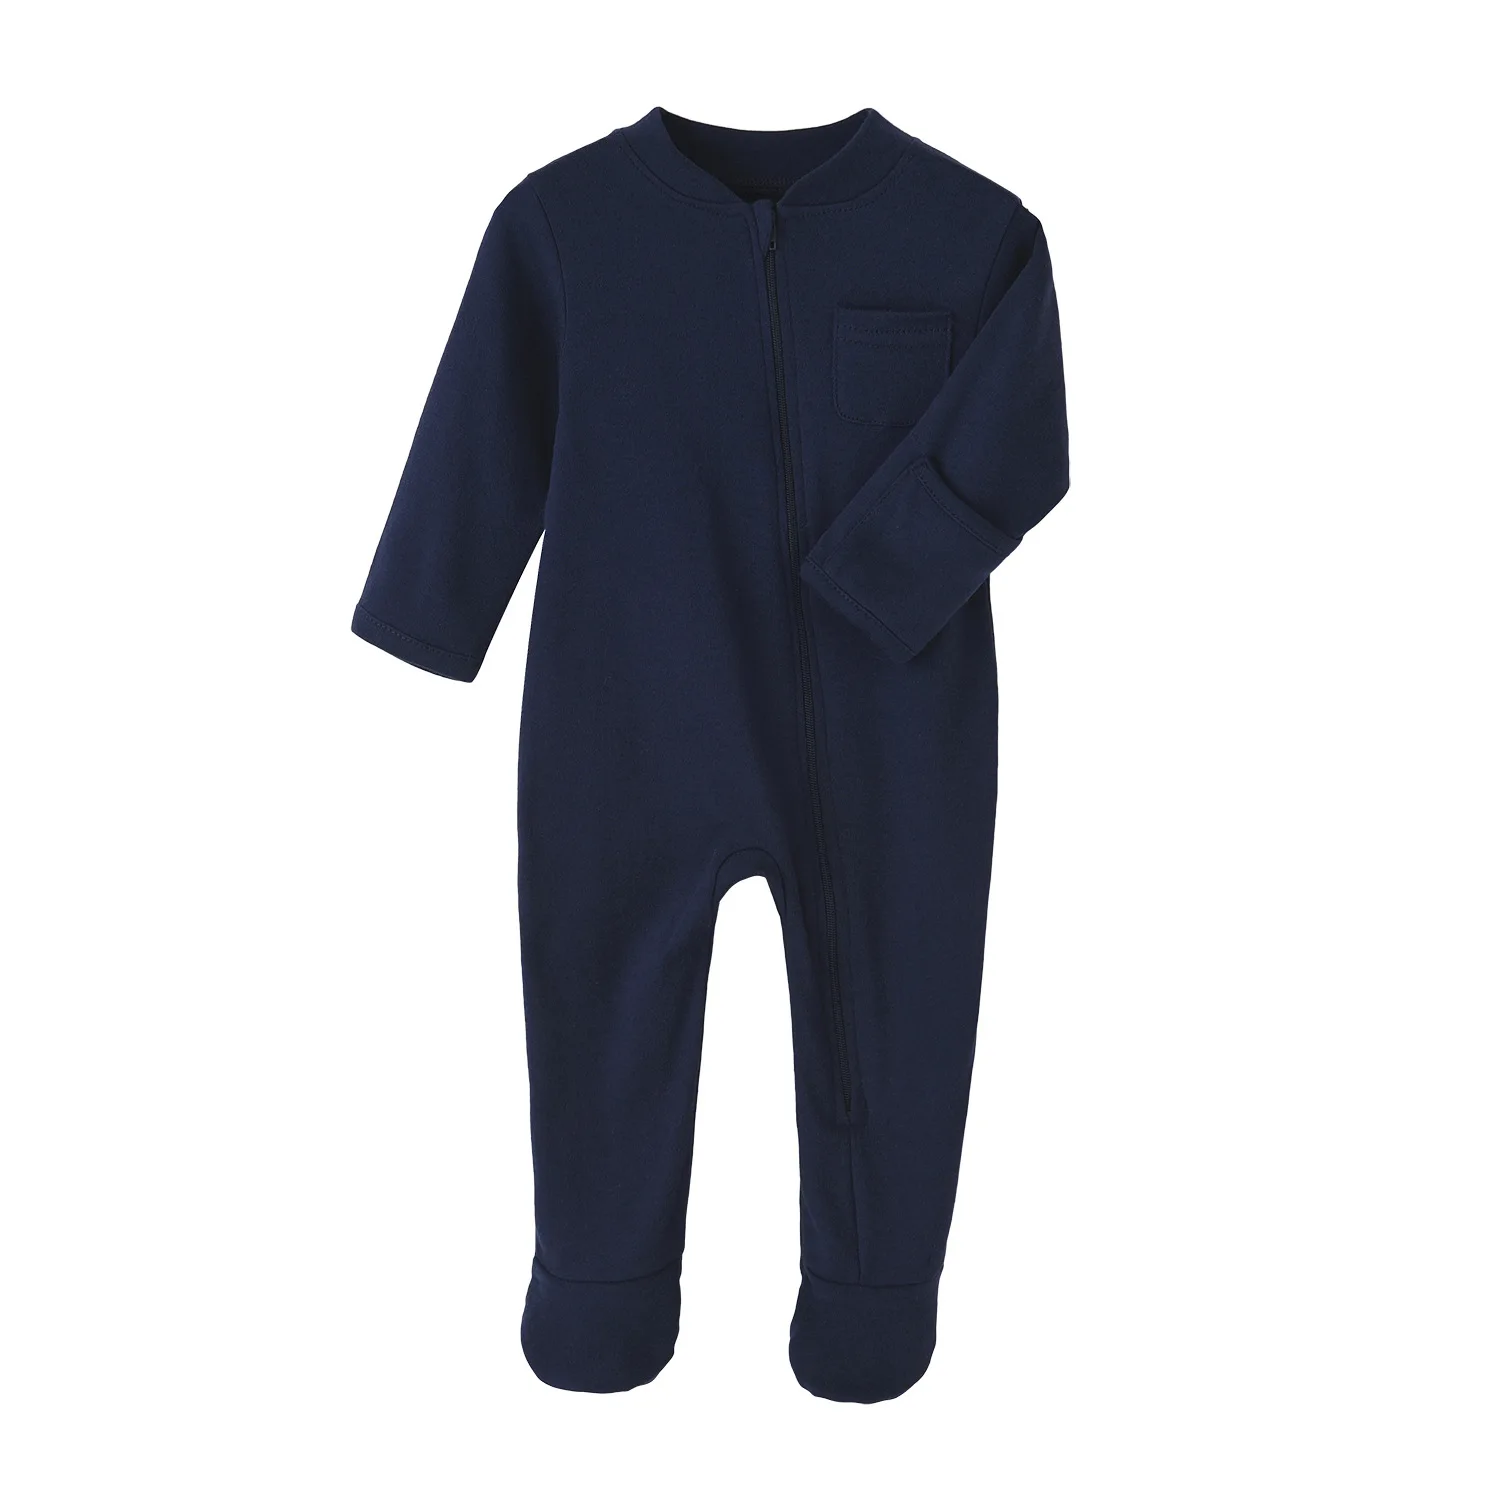 Plain Baby Rompers 100% Cotton Infant Pajamas With Footie Zipper Baby ...